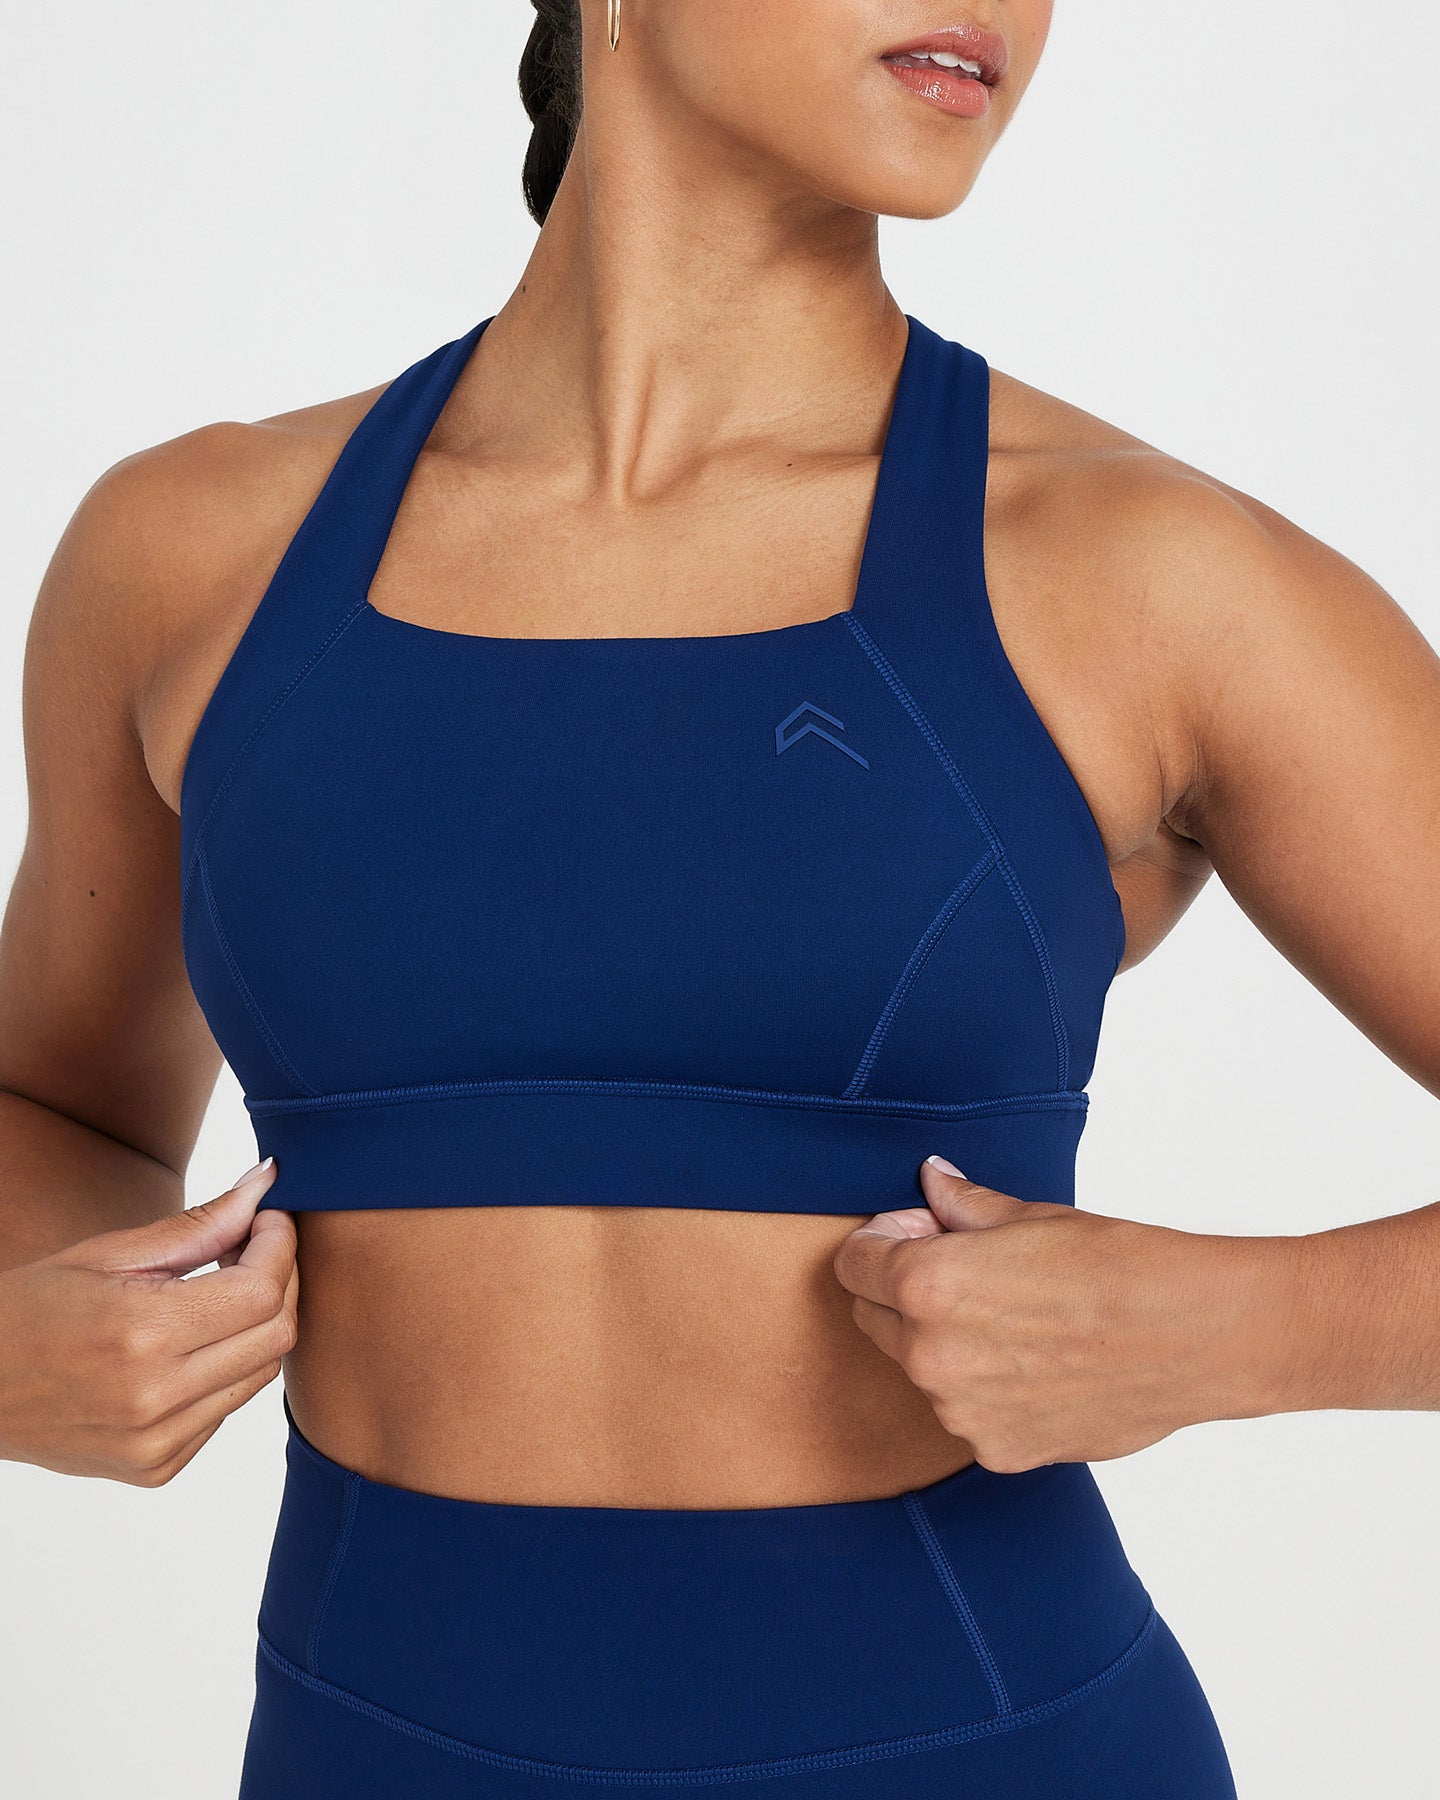 SEA LEVEL WMNS INFINITY SQUARE NECK BRA TOP - Totally Sports & Surf